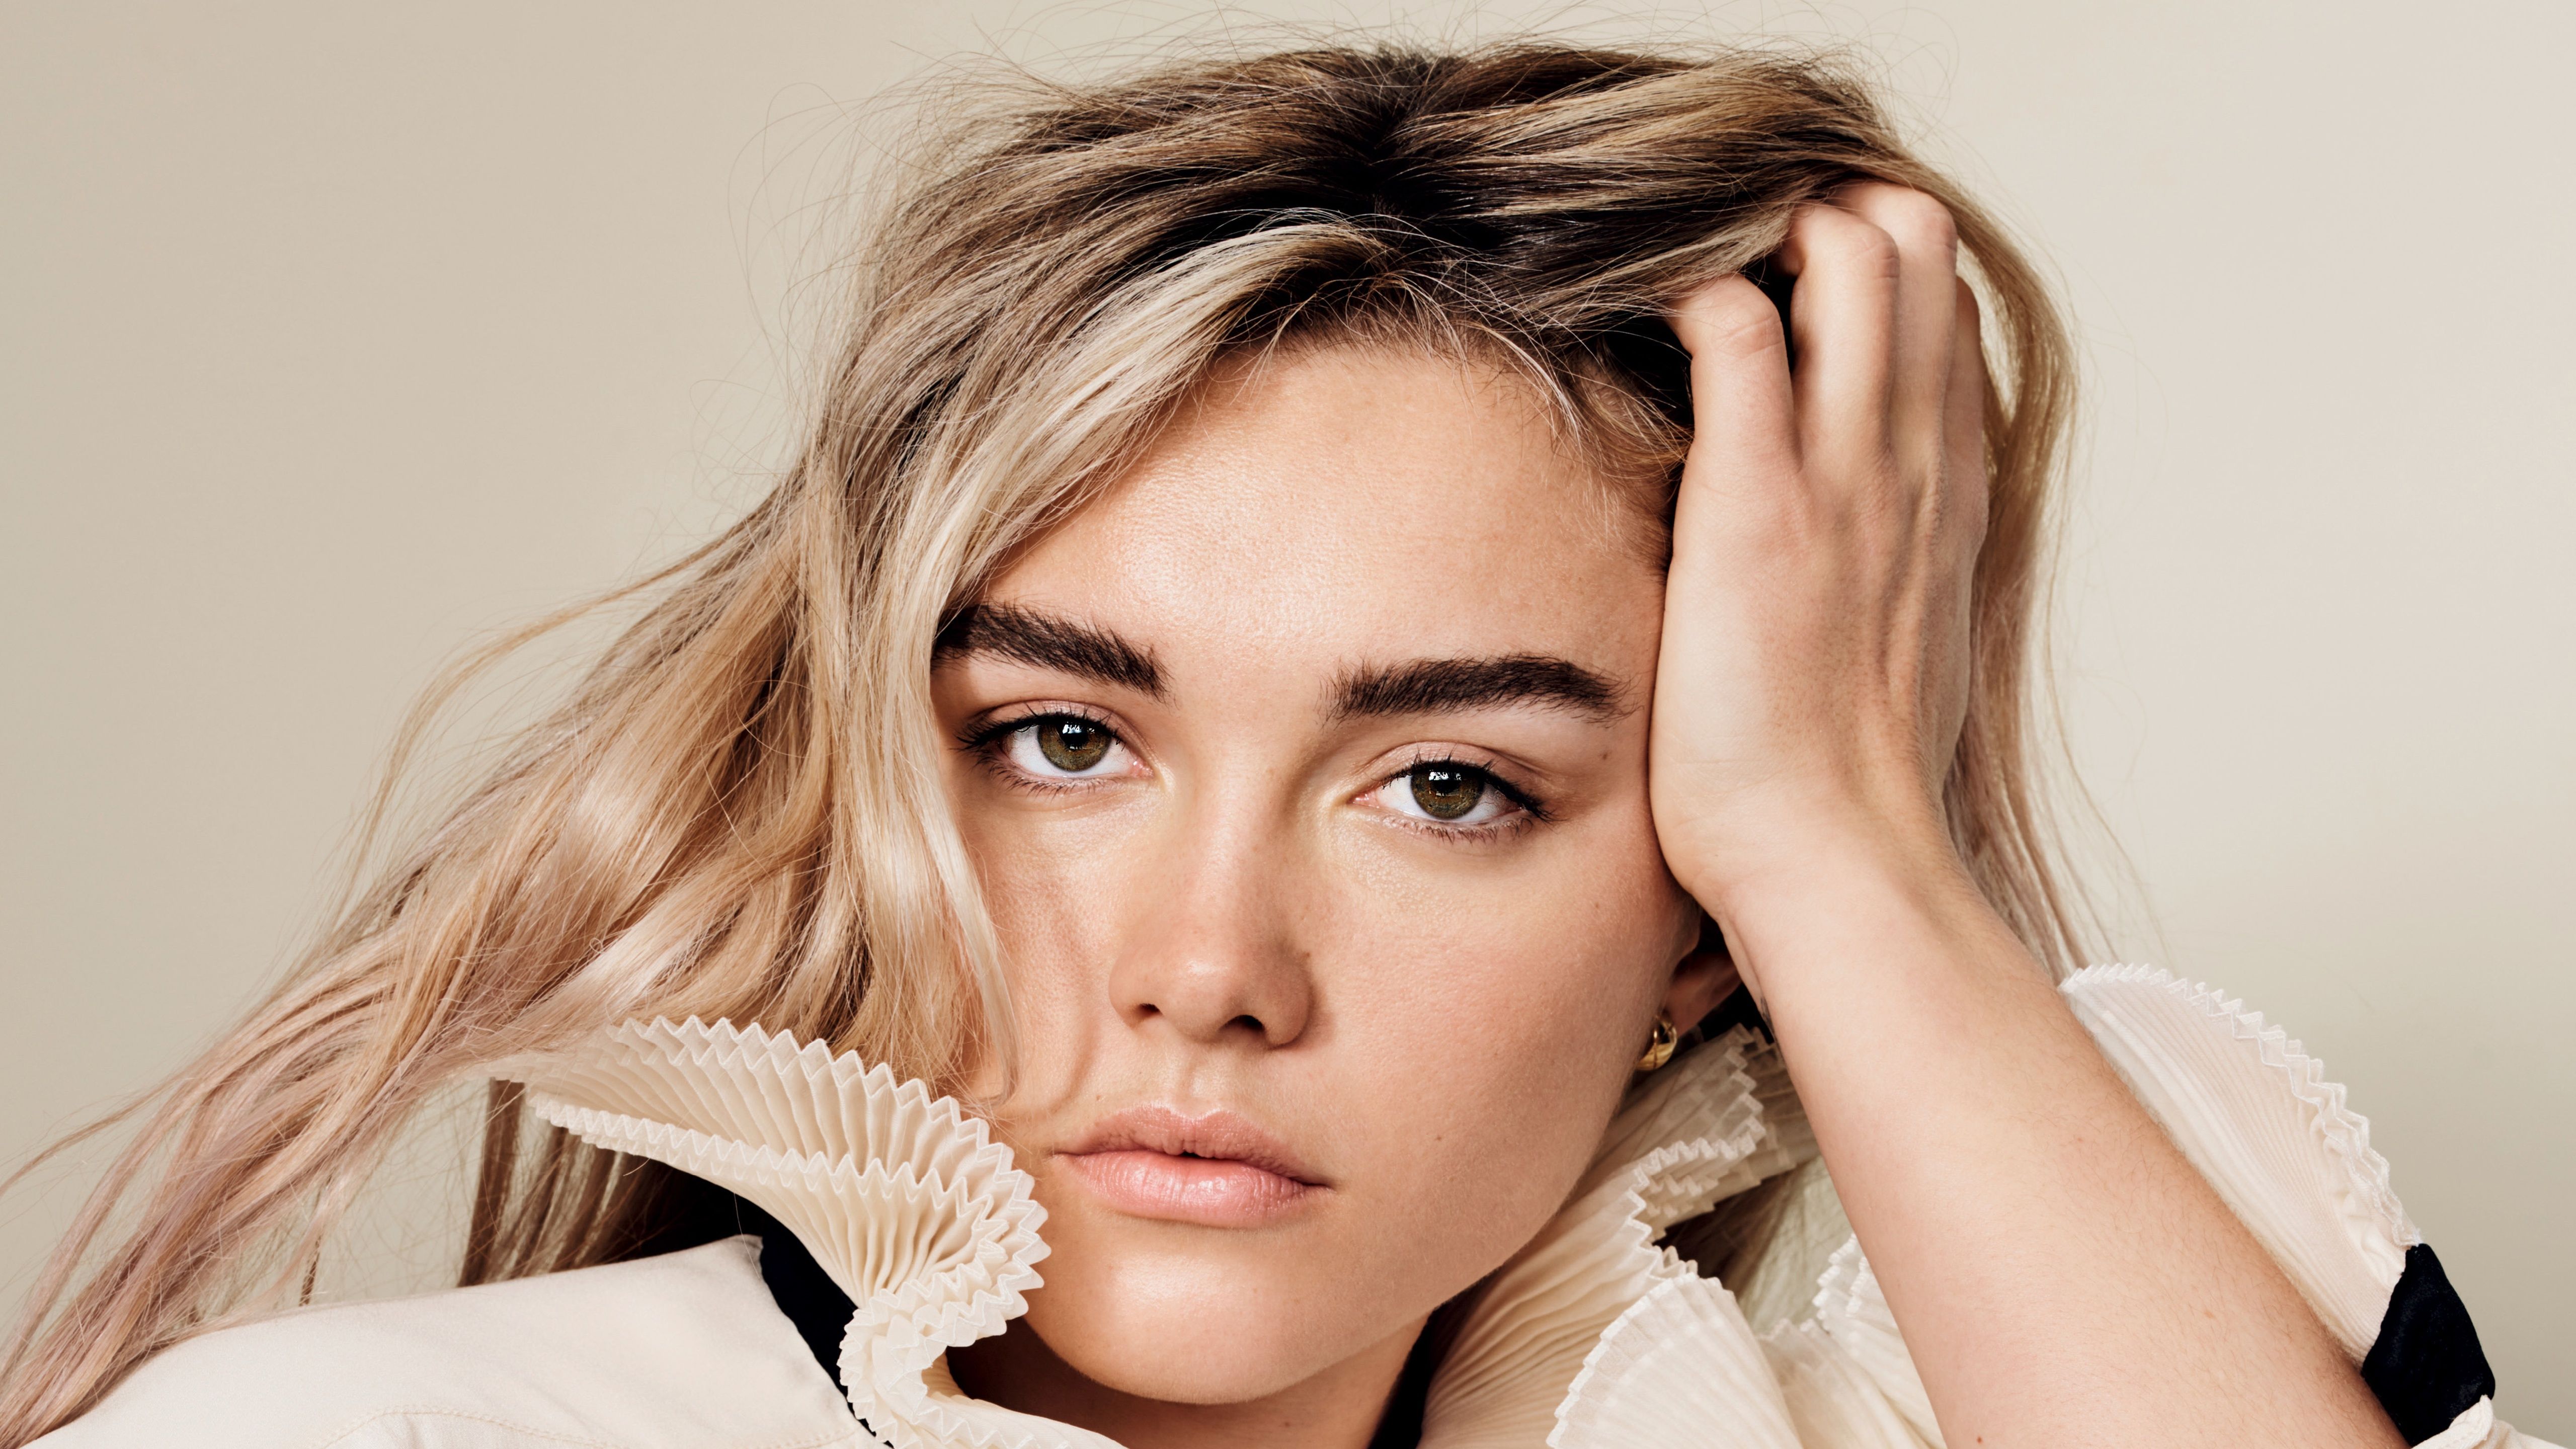 Portrait of a young woman with hand in hair - Florence Pugh